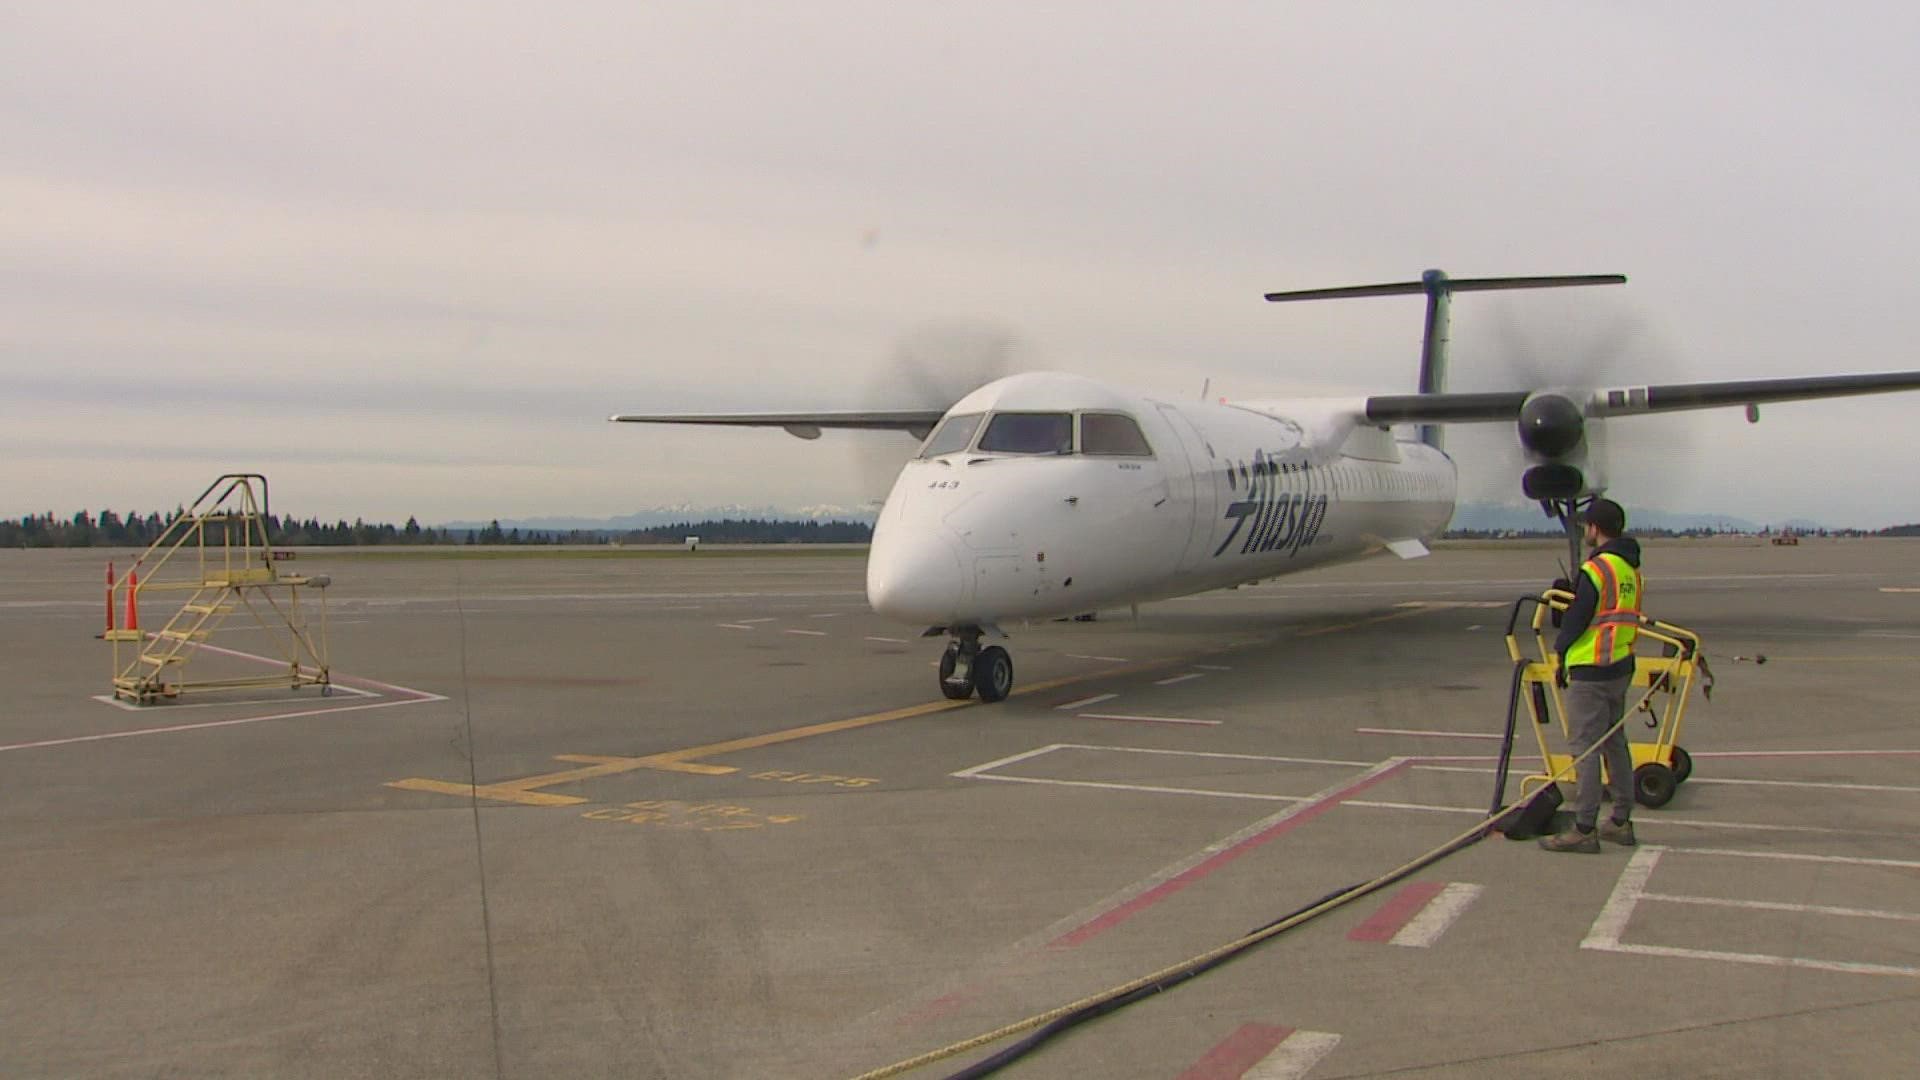 To combat a worldwide shortage of pilots, Alaska is offering to cover $25,000 worth of training costs and help arrange low-interest loans to pay for the rest.